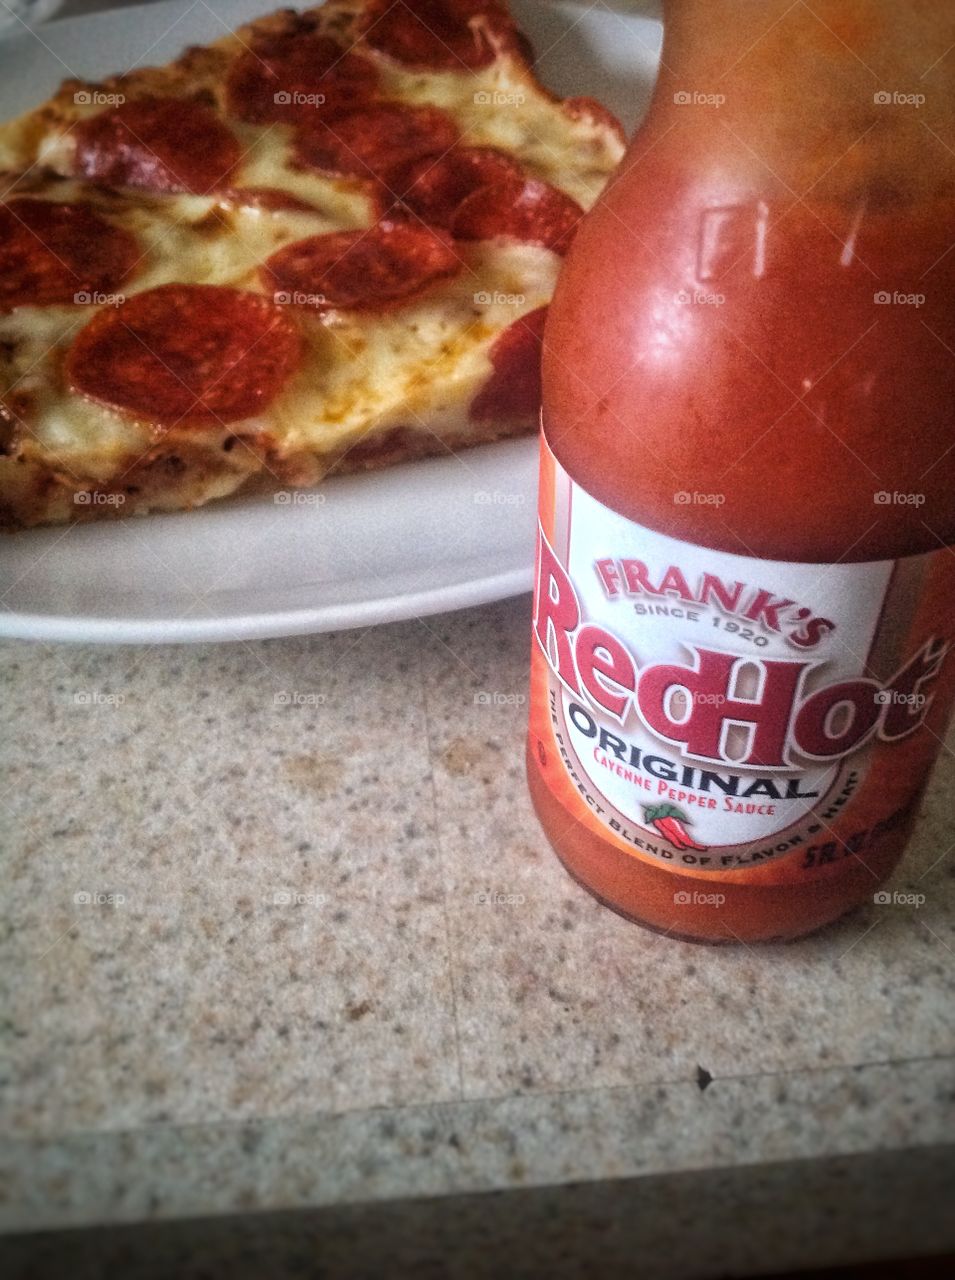 Frank's redhot pizza